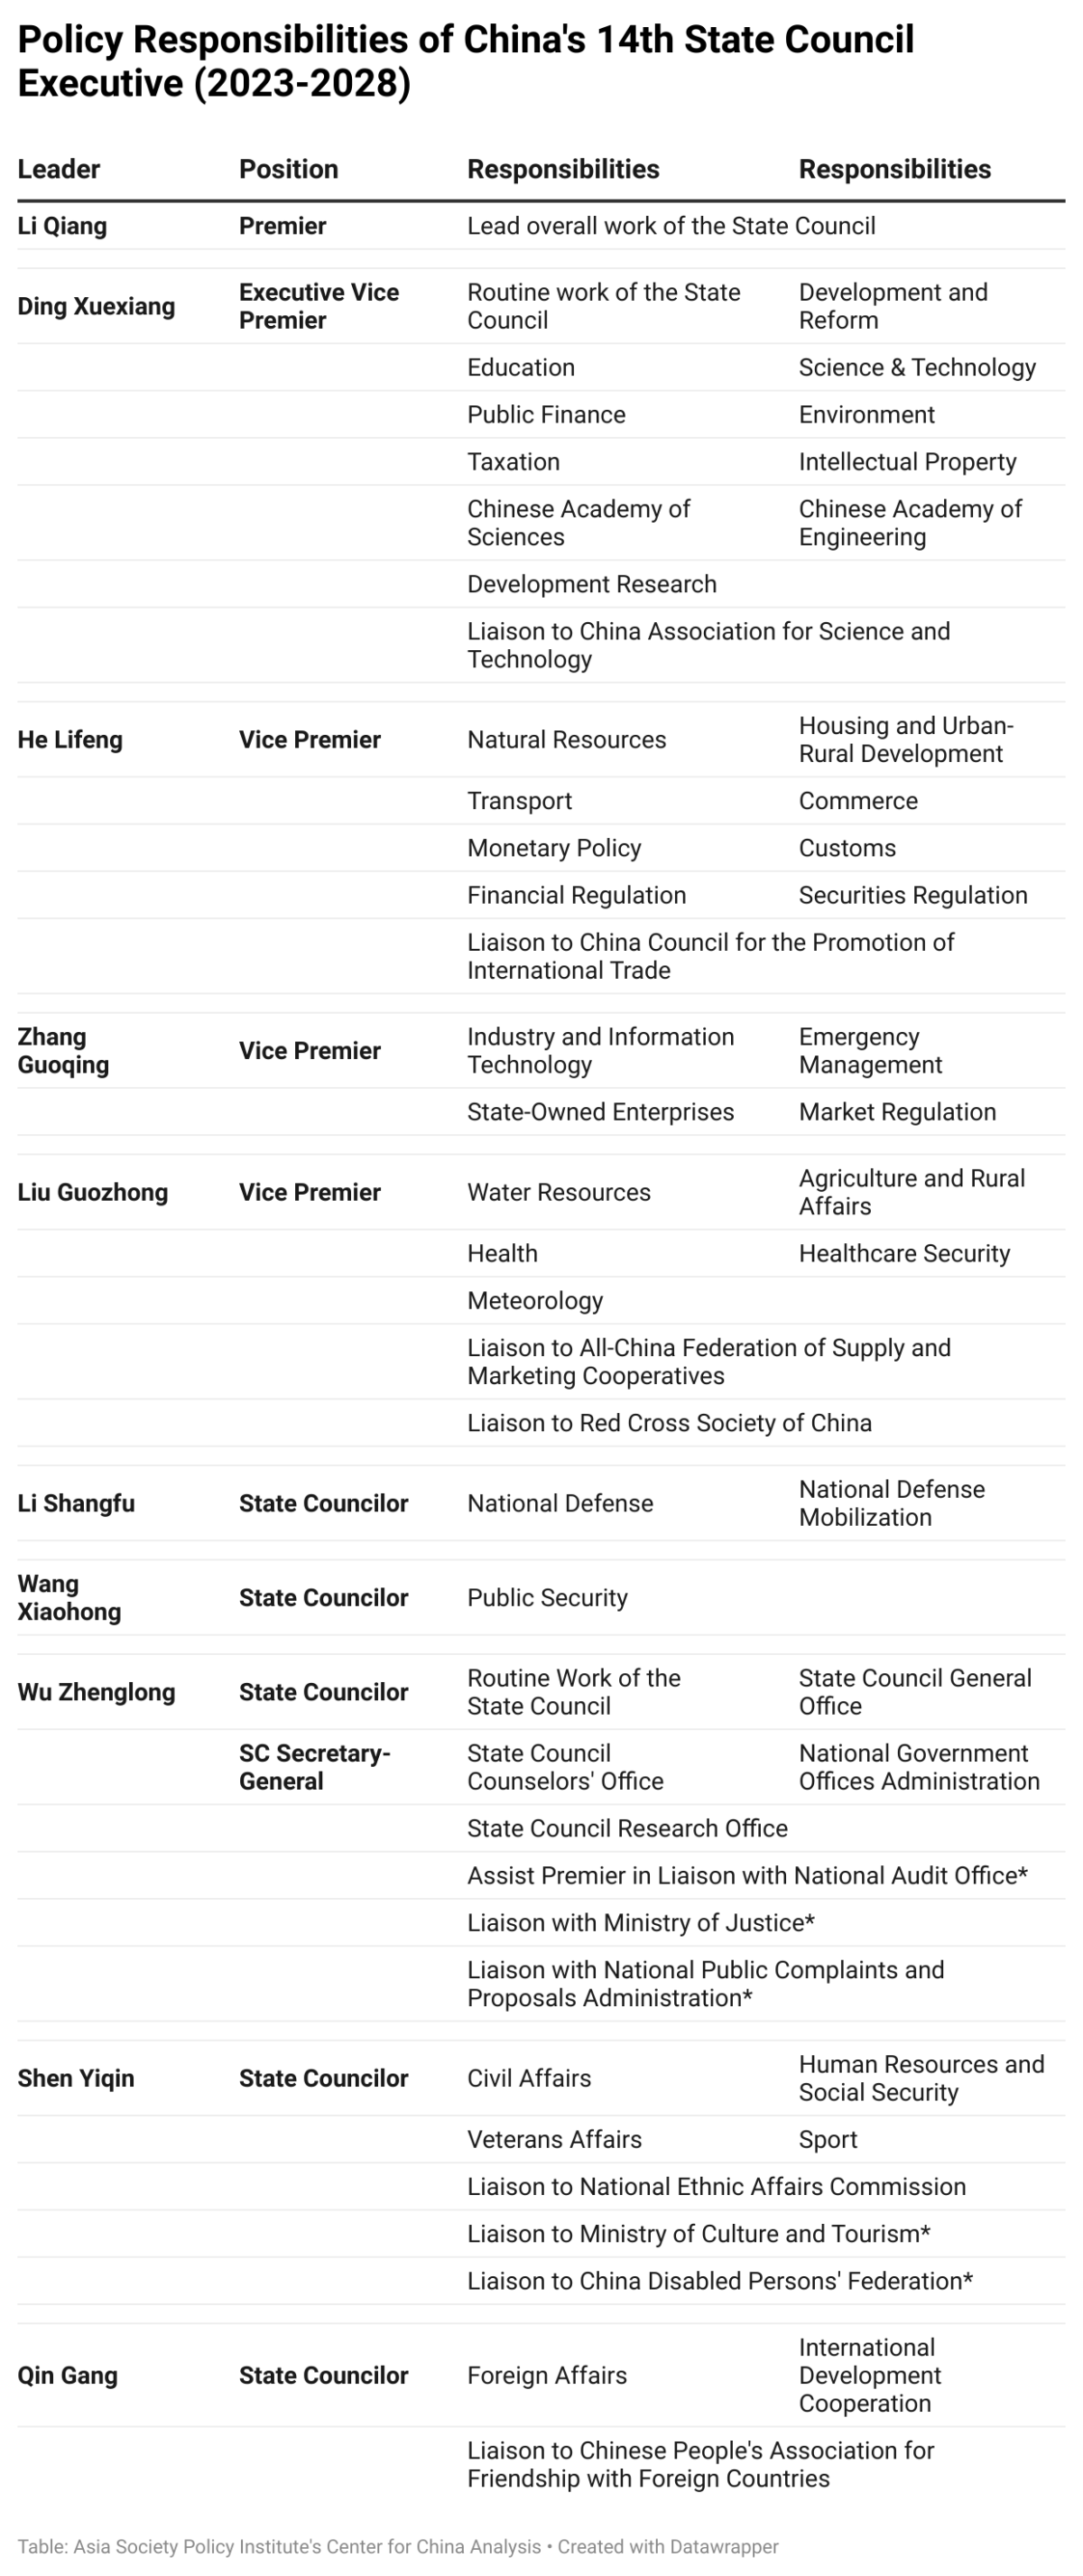 Table 2: Policy assignments of the 13th State Council executive (2018-2023)